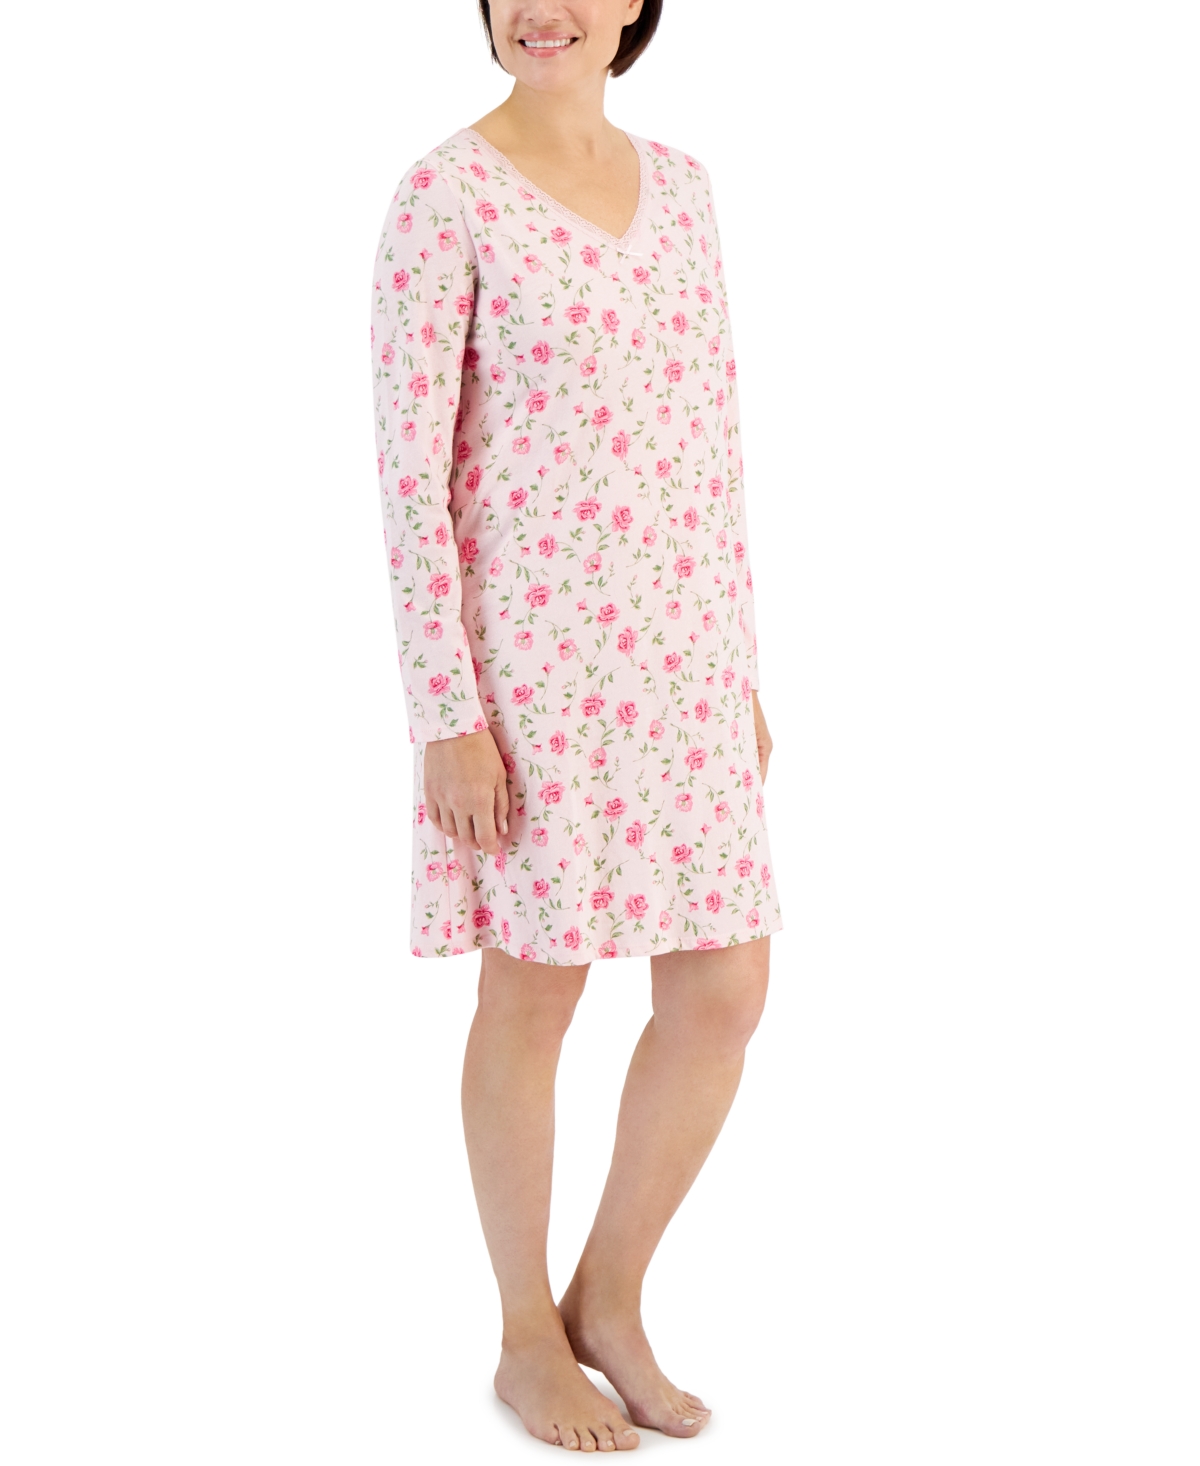 Women's Cotton Long-Sleeve Lace-Trim Sleepshirt, Created for Macy's - Butterfly Dots